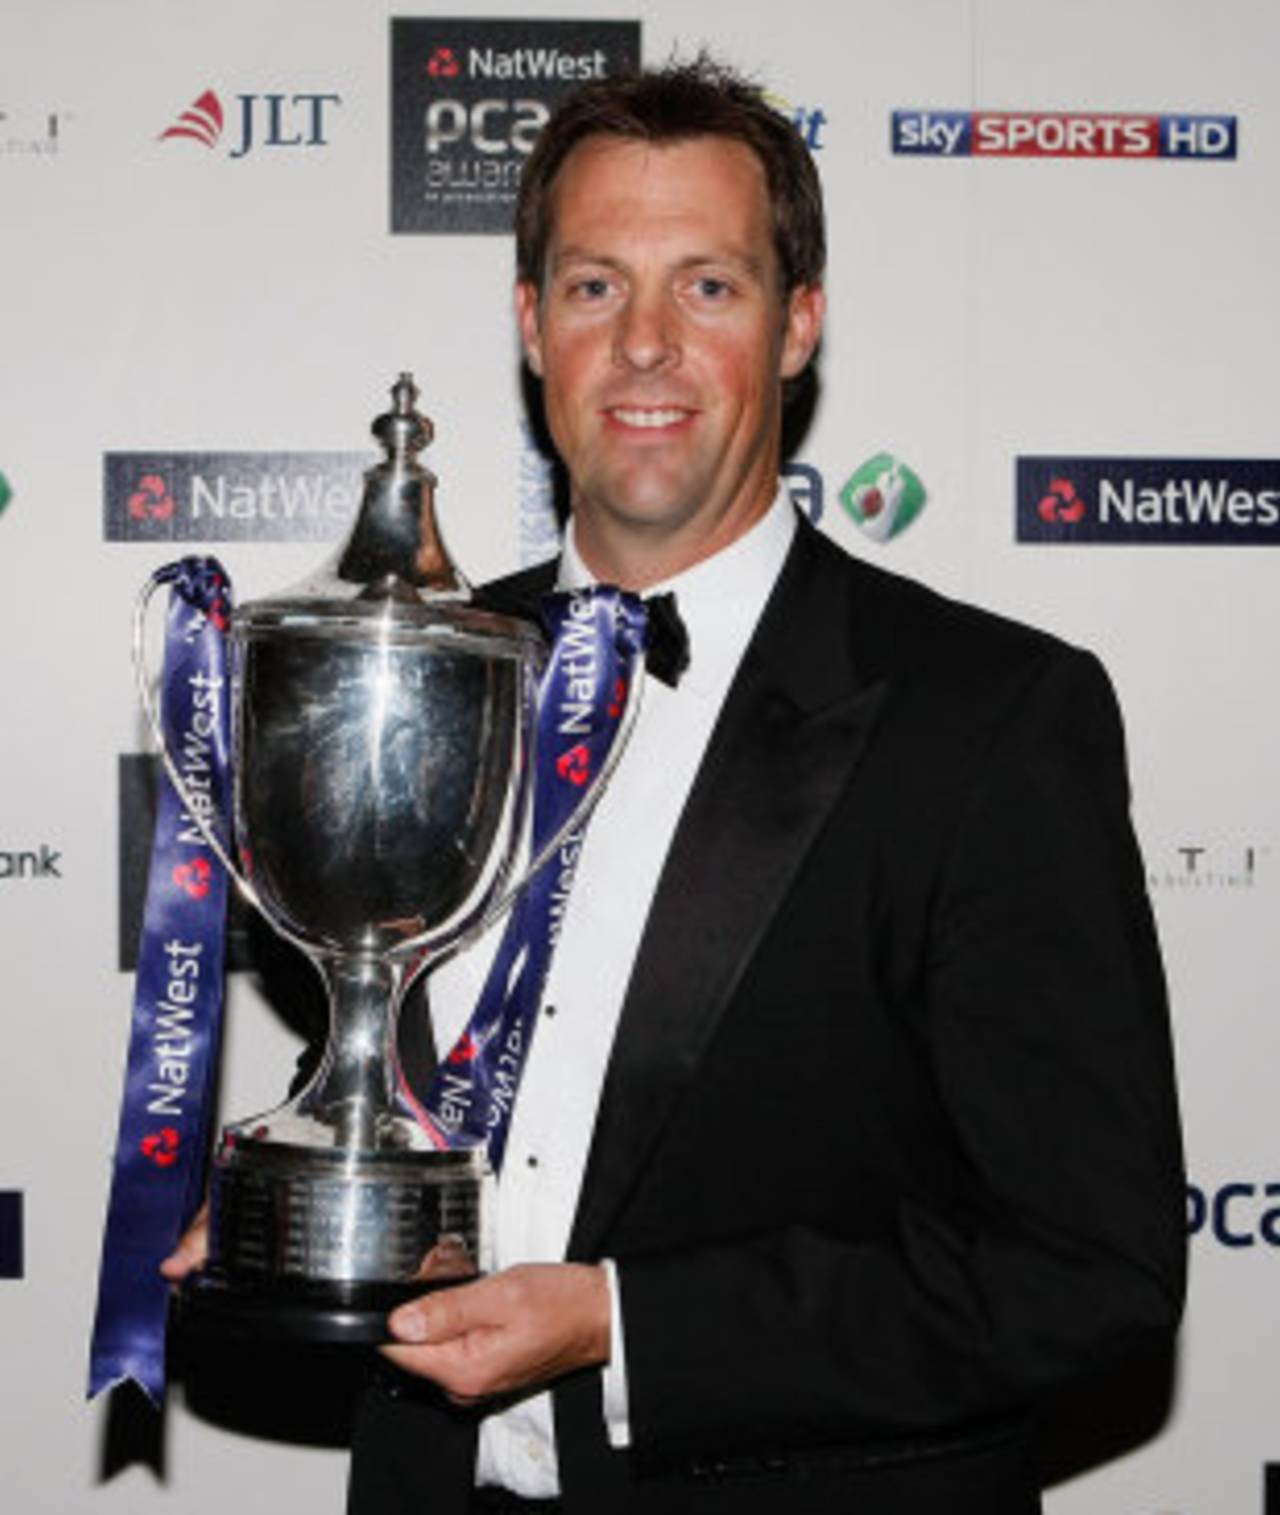 Marcus Trescothick was PCA Player of the Year, London, September 23, 2011